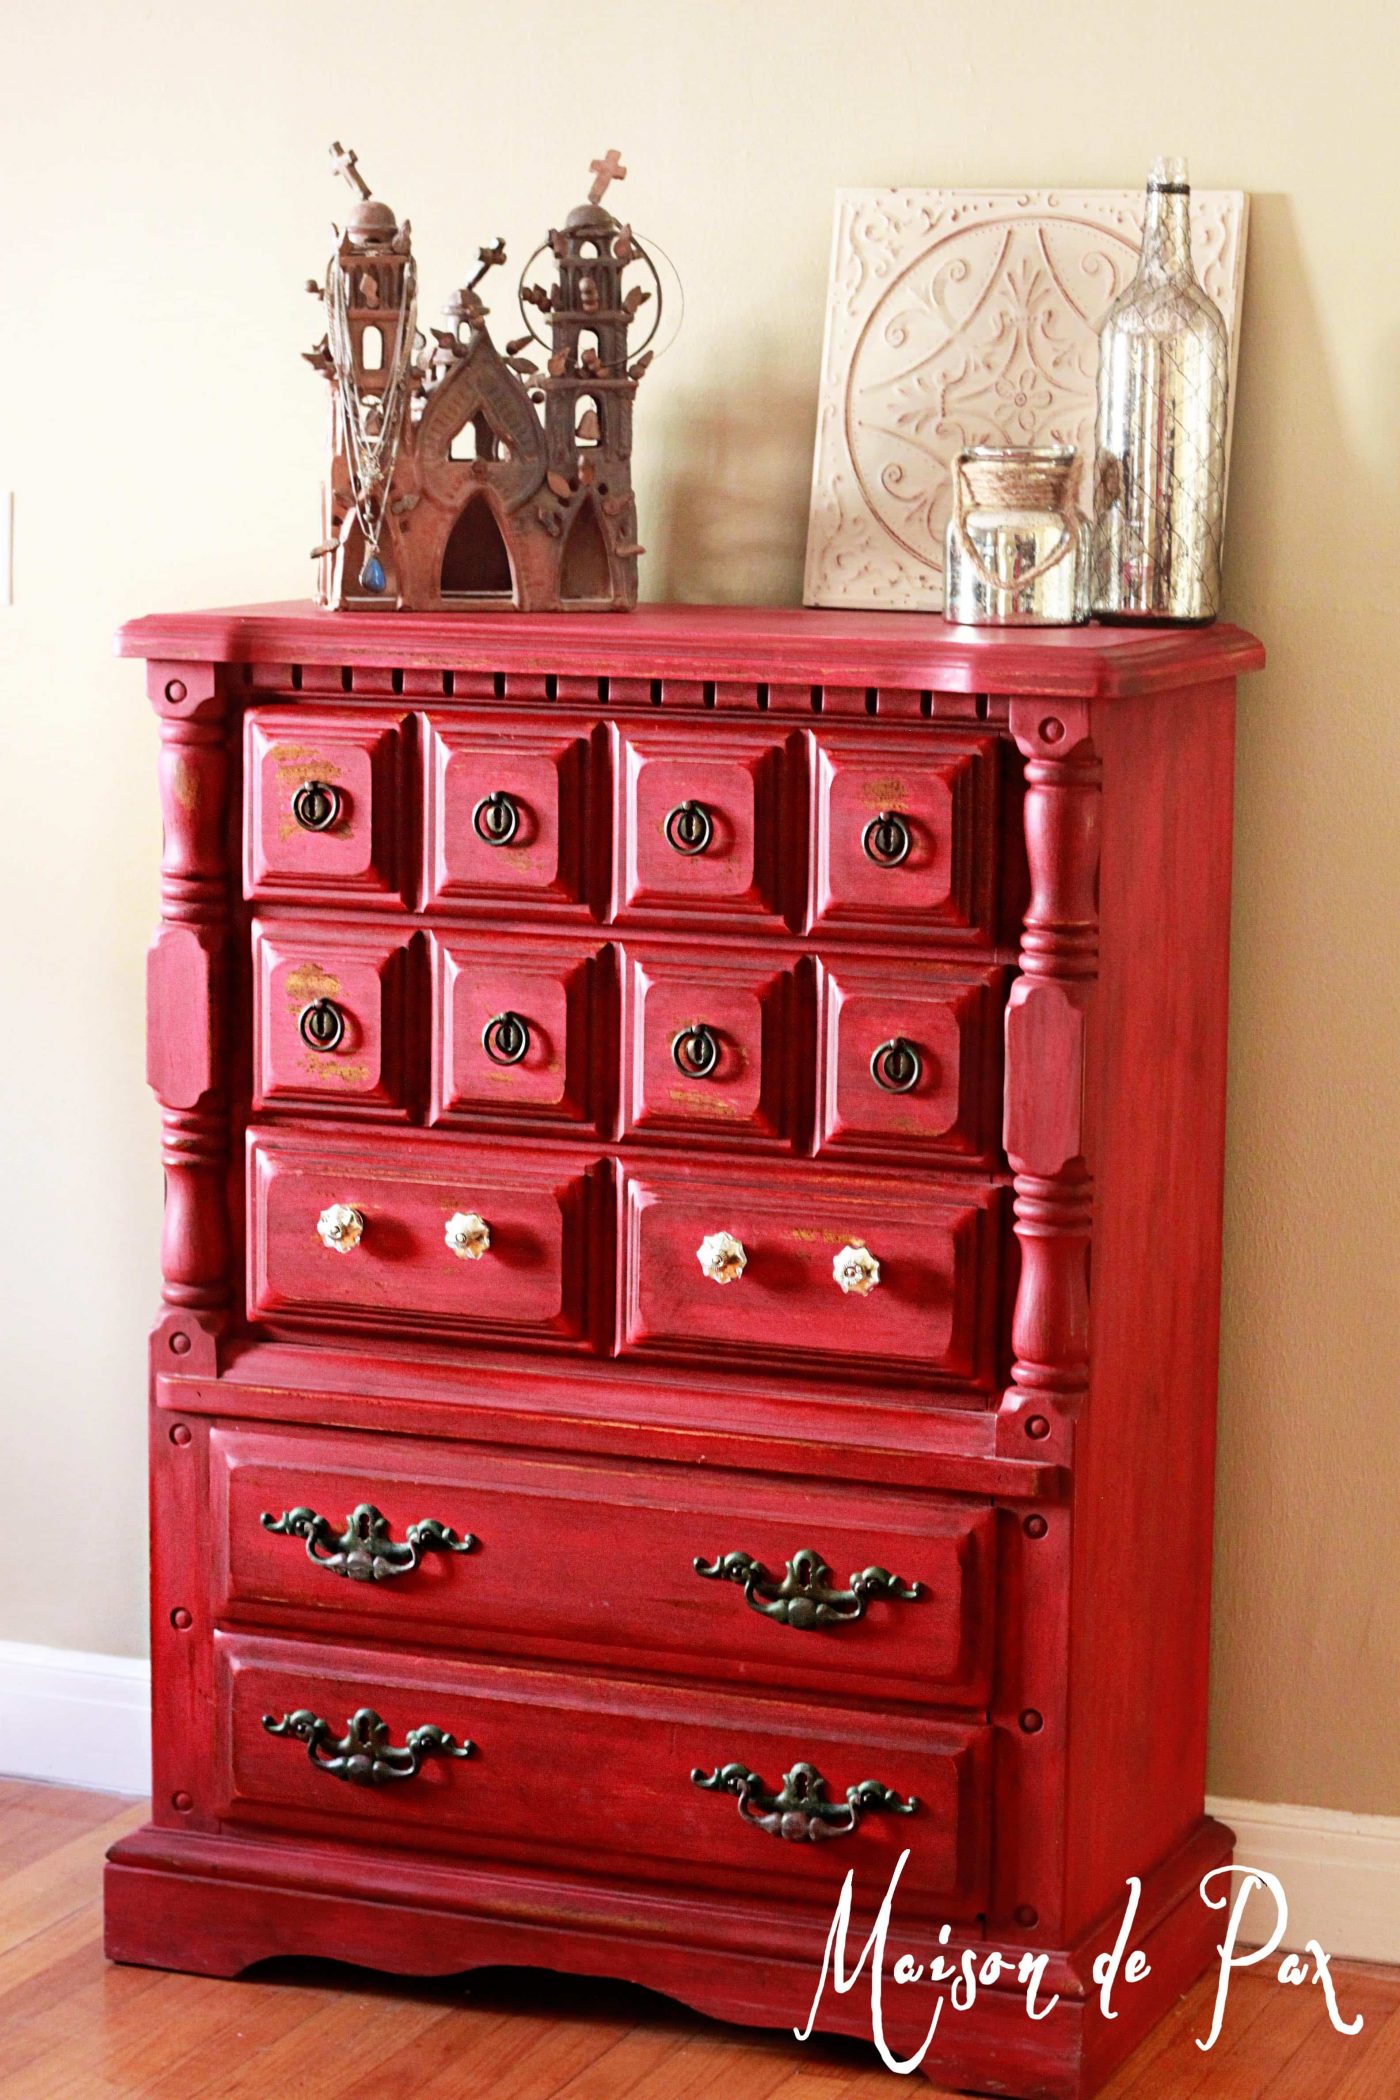 Full tutorial on creating this gorgeous, vibrant yet vintage look with milk paint at maisondepax.com